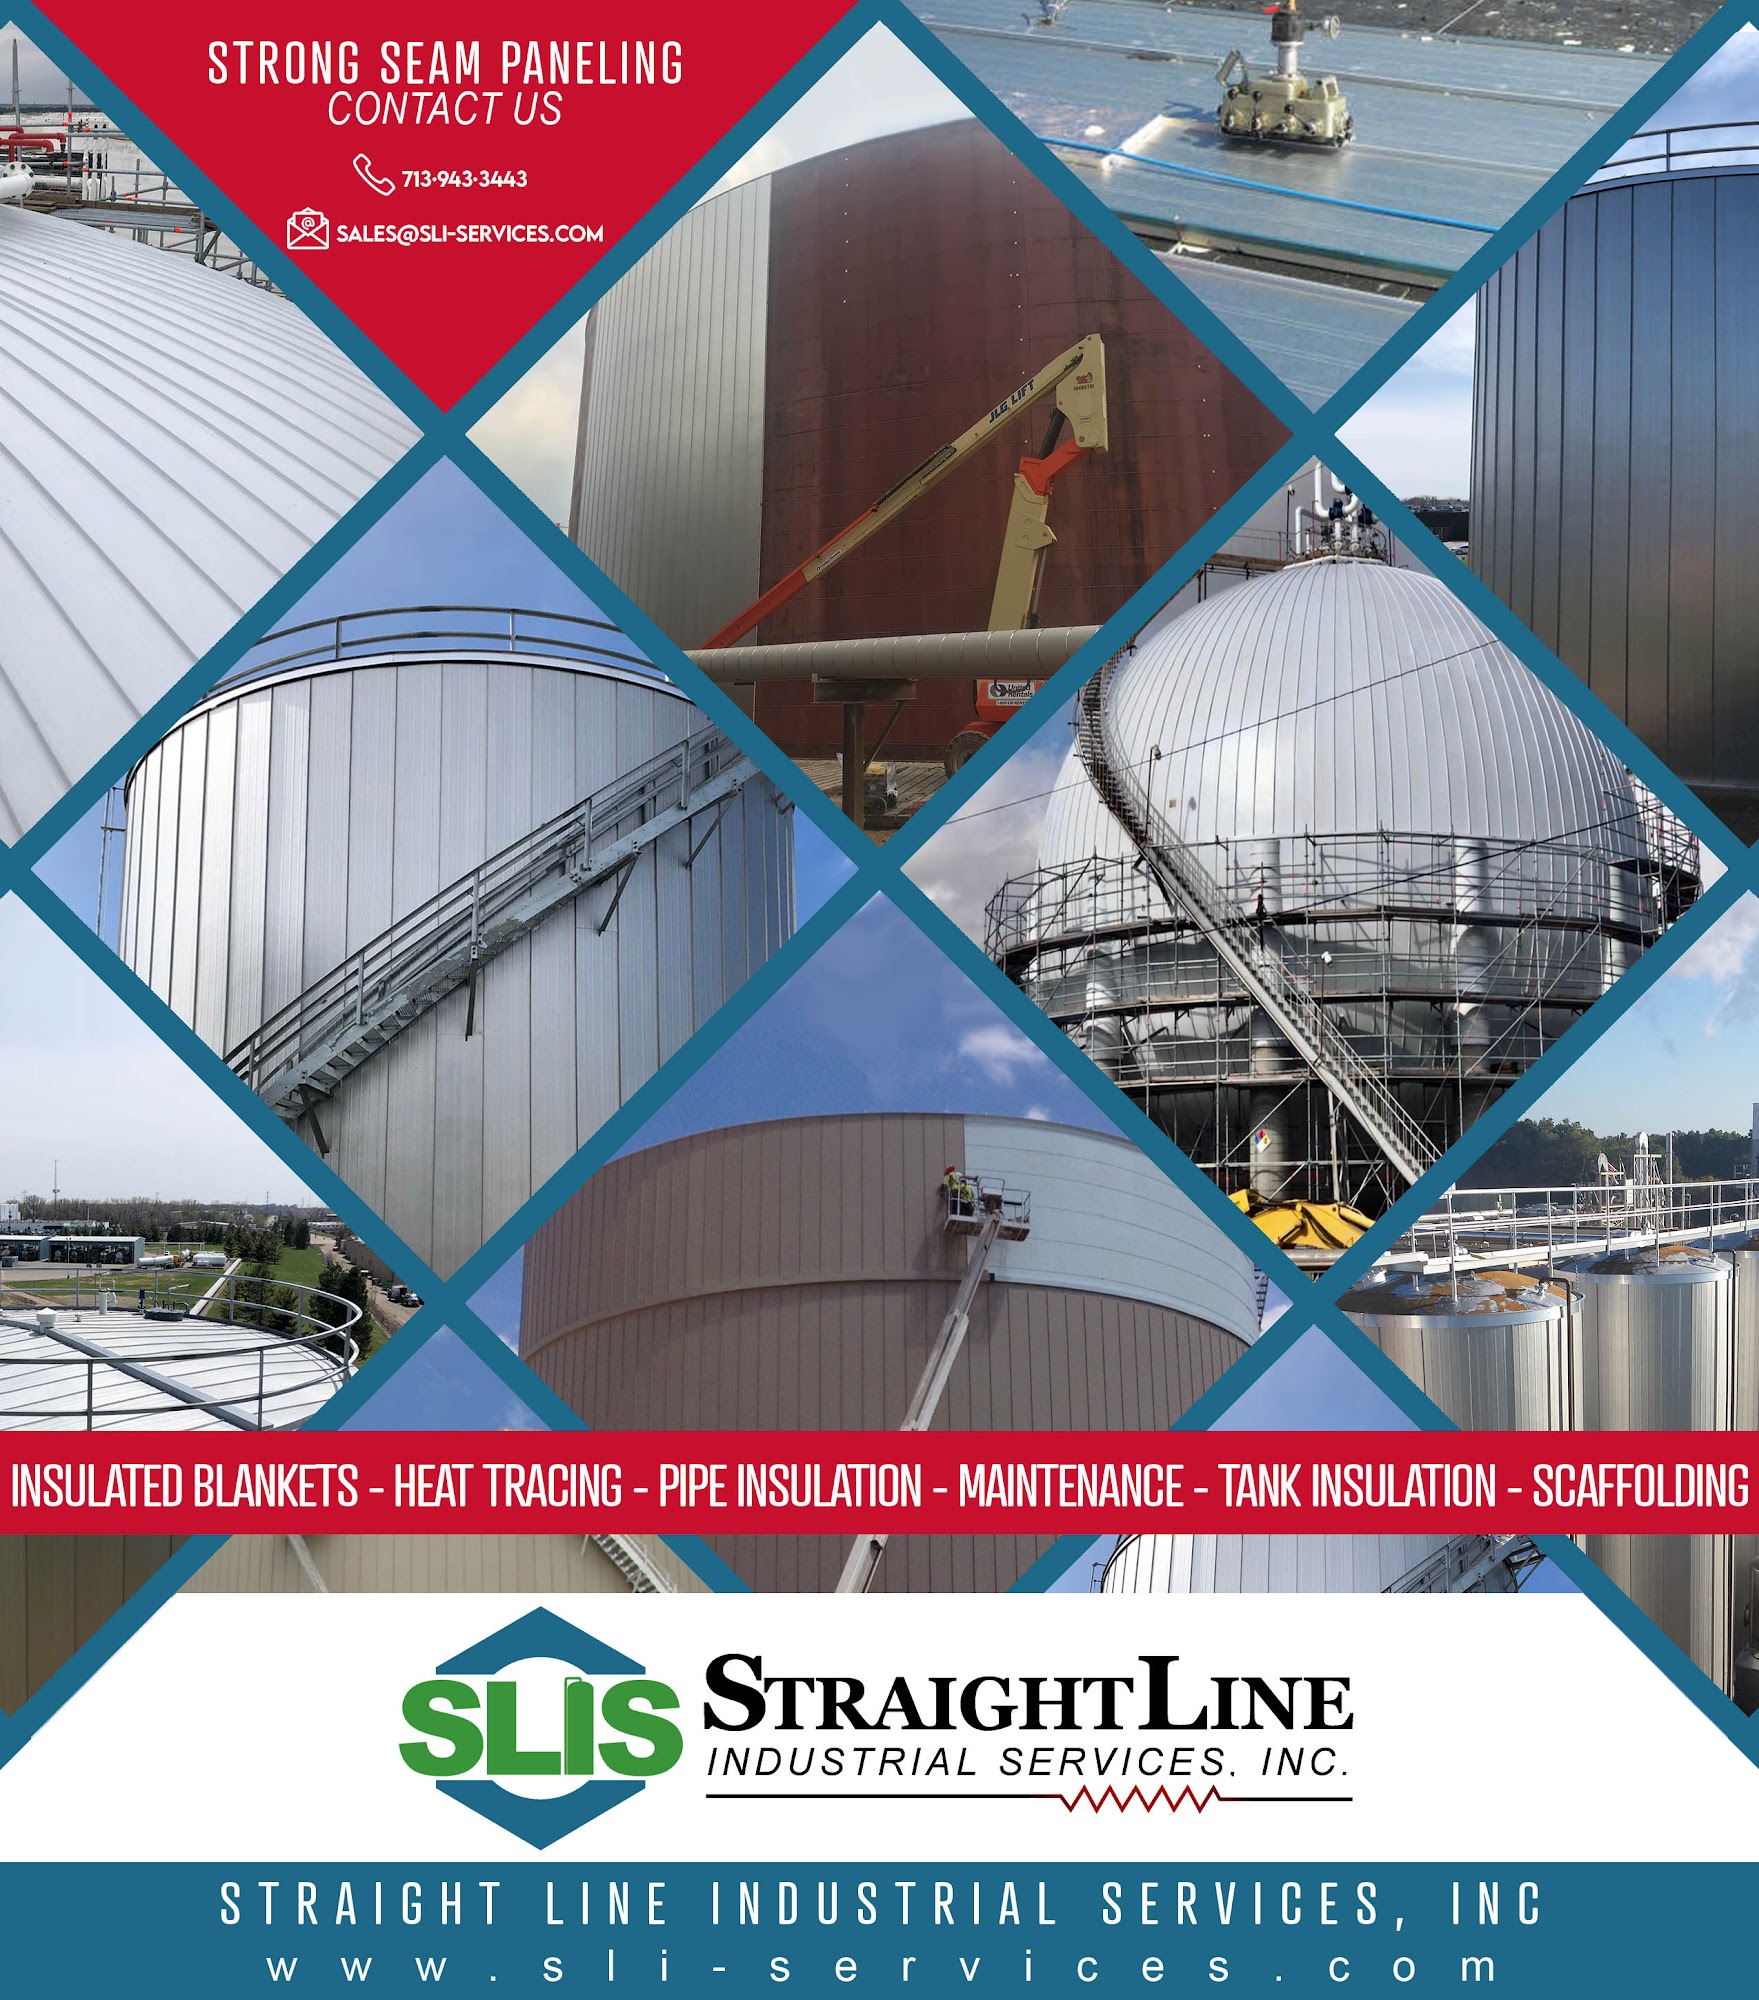 Straight Line Industrial Services, Inc. 1101 Michigan St, South Houston Texas 77587